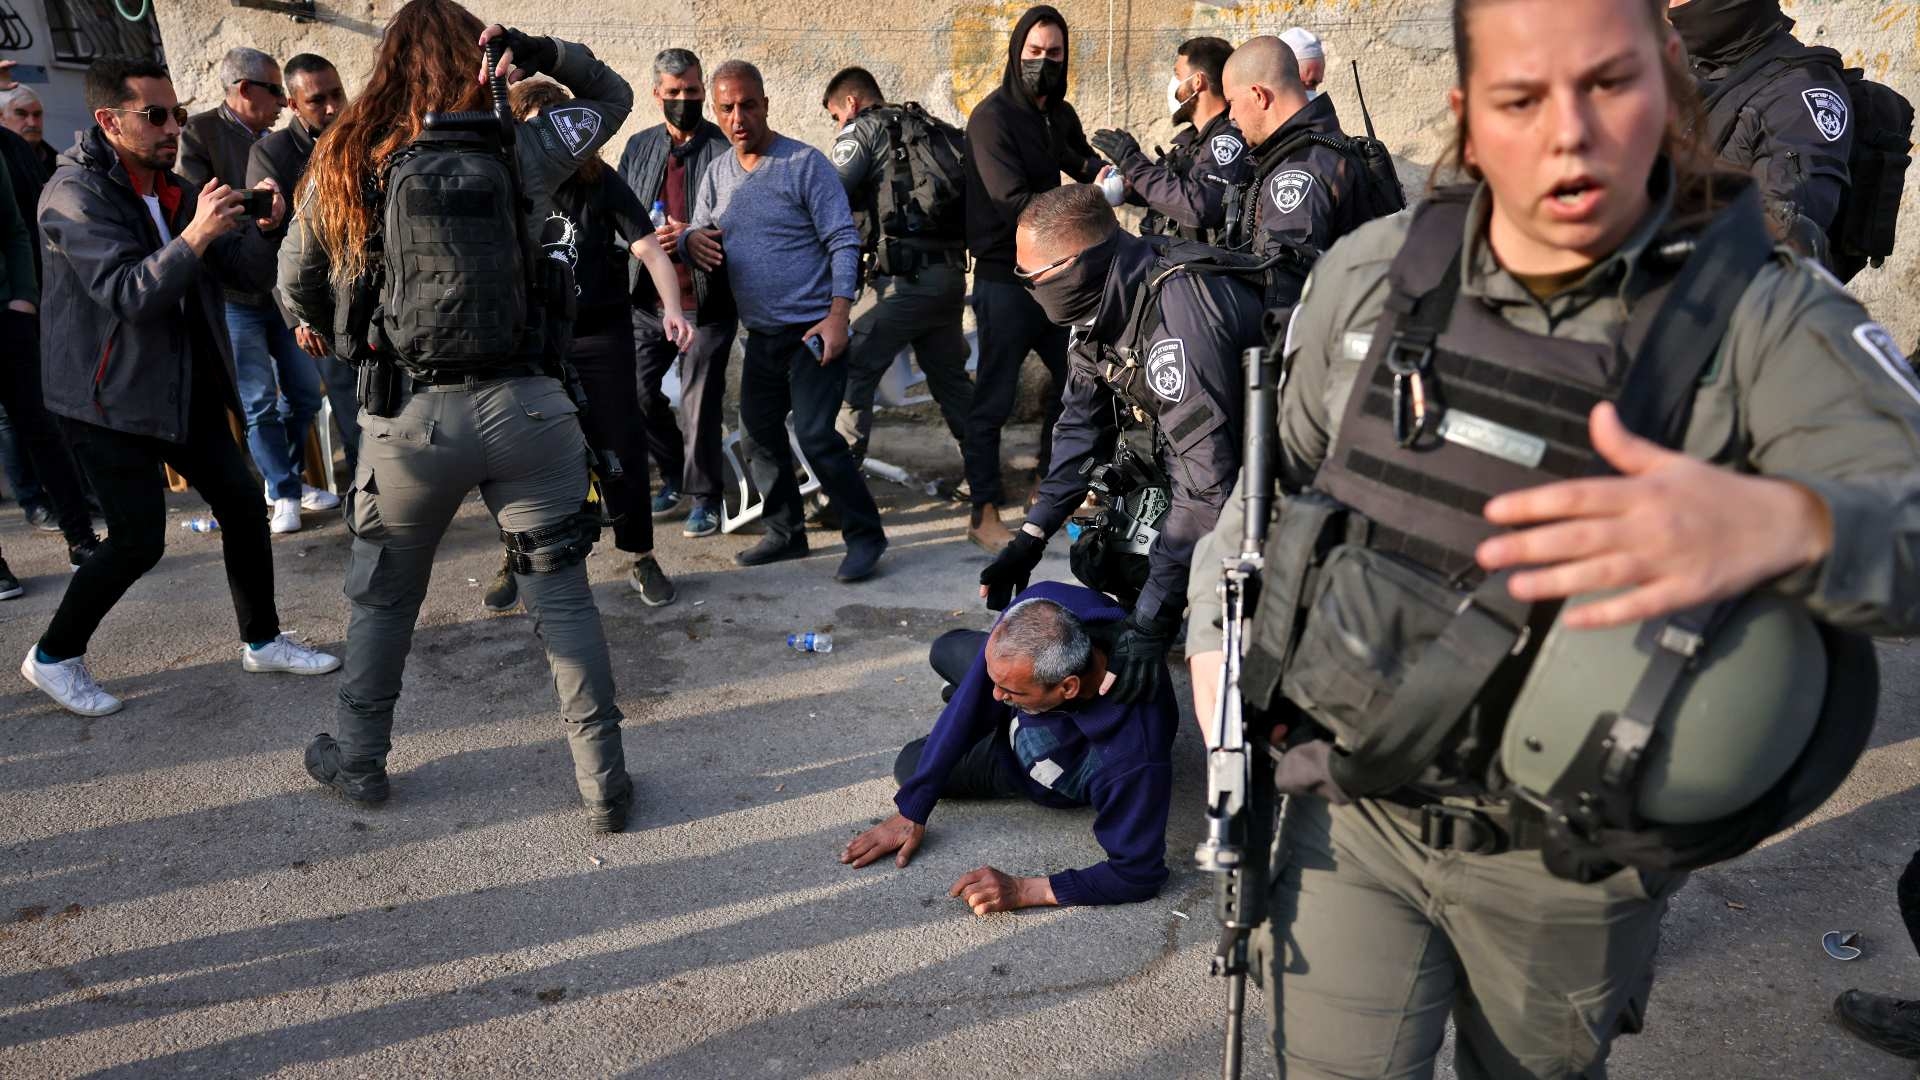 Members of the Israeli border guard stand by as Israeli police detain a man during a protest in the flashpoint East Jerusalem neighbourhood of Sheikh Jarrah on 18 February 2022.